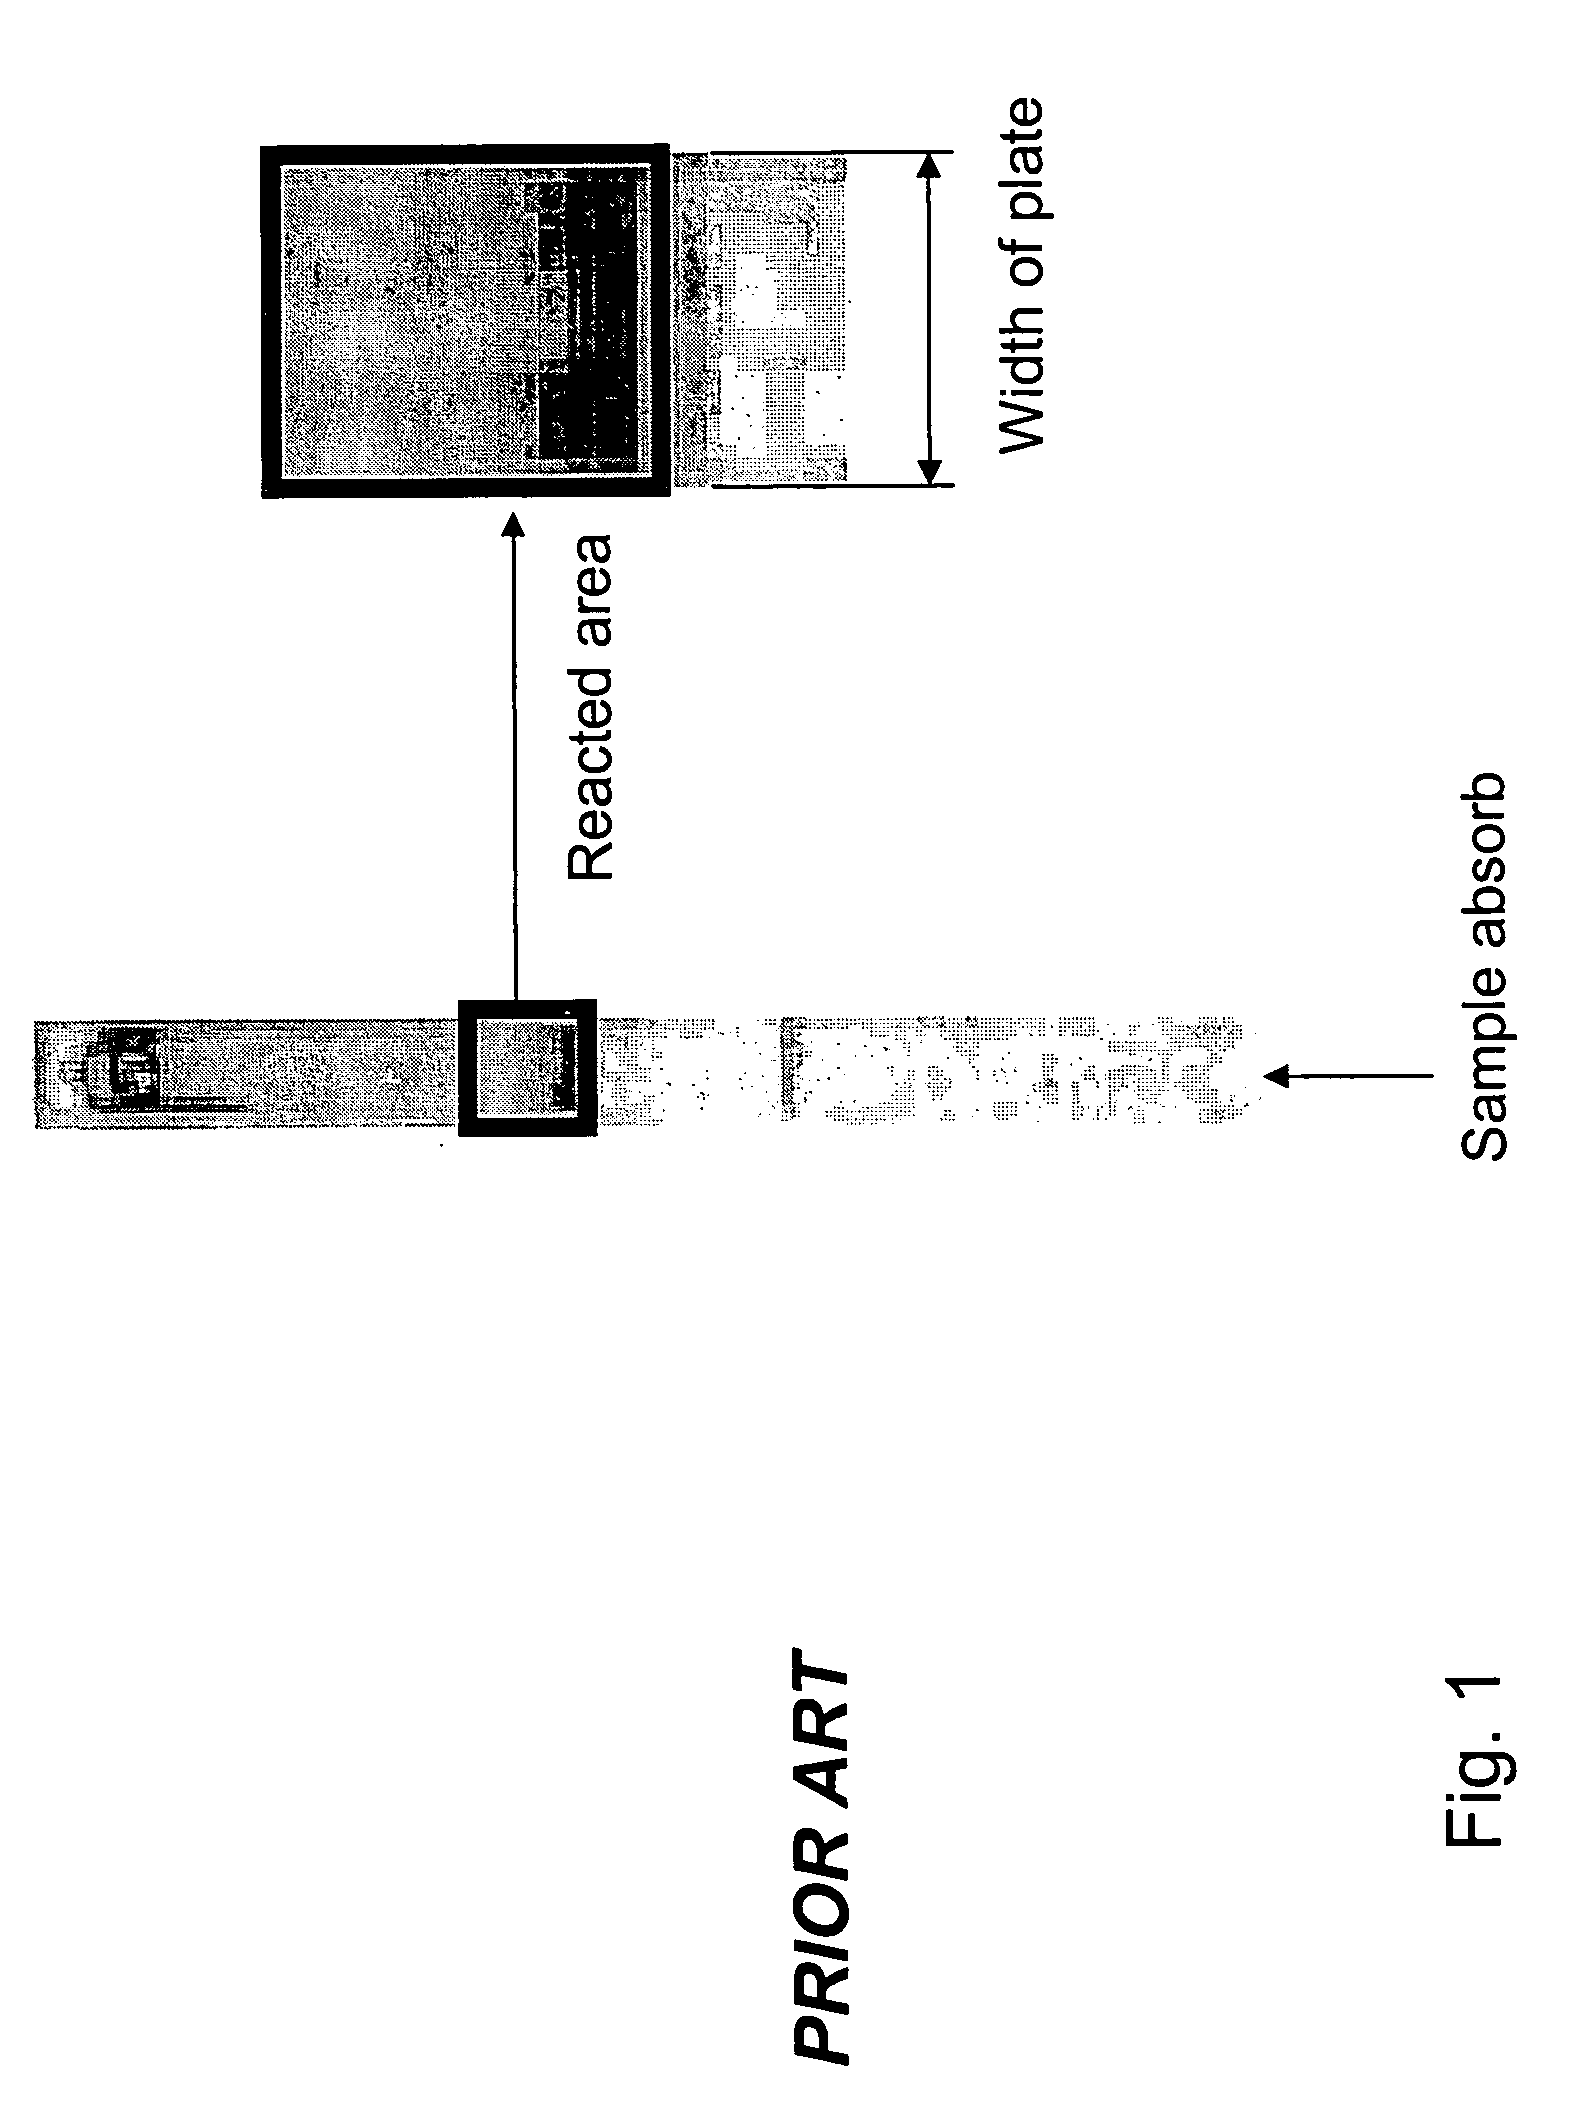 Analyte assay structure in microfluidic chip for quantitative analysis and method for using the same